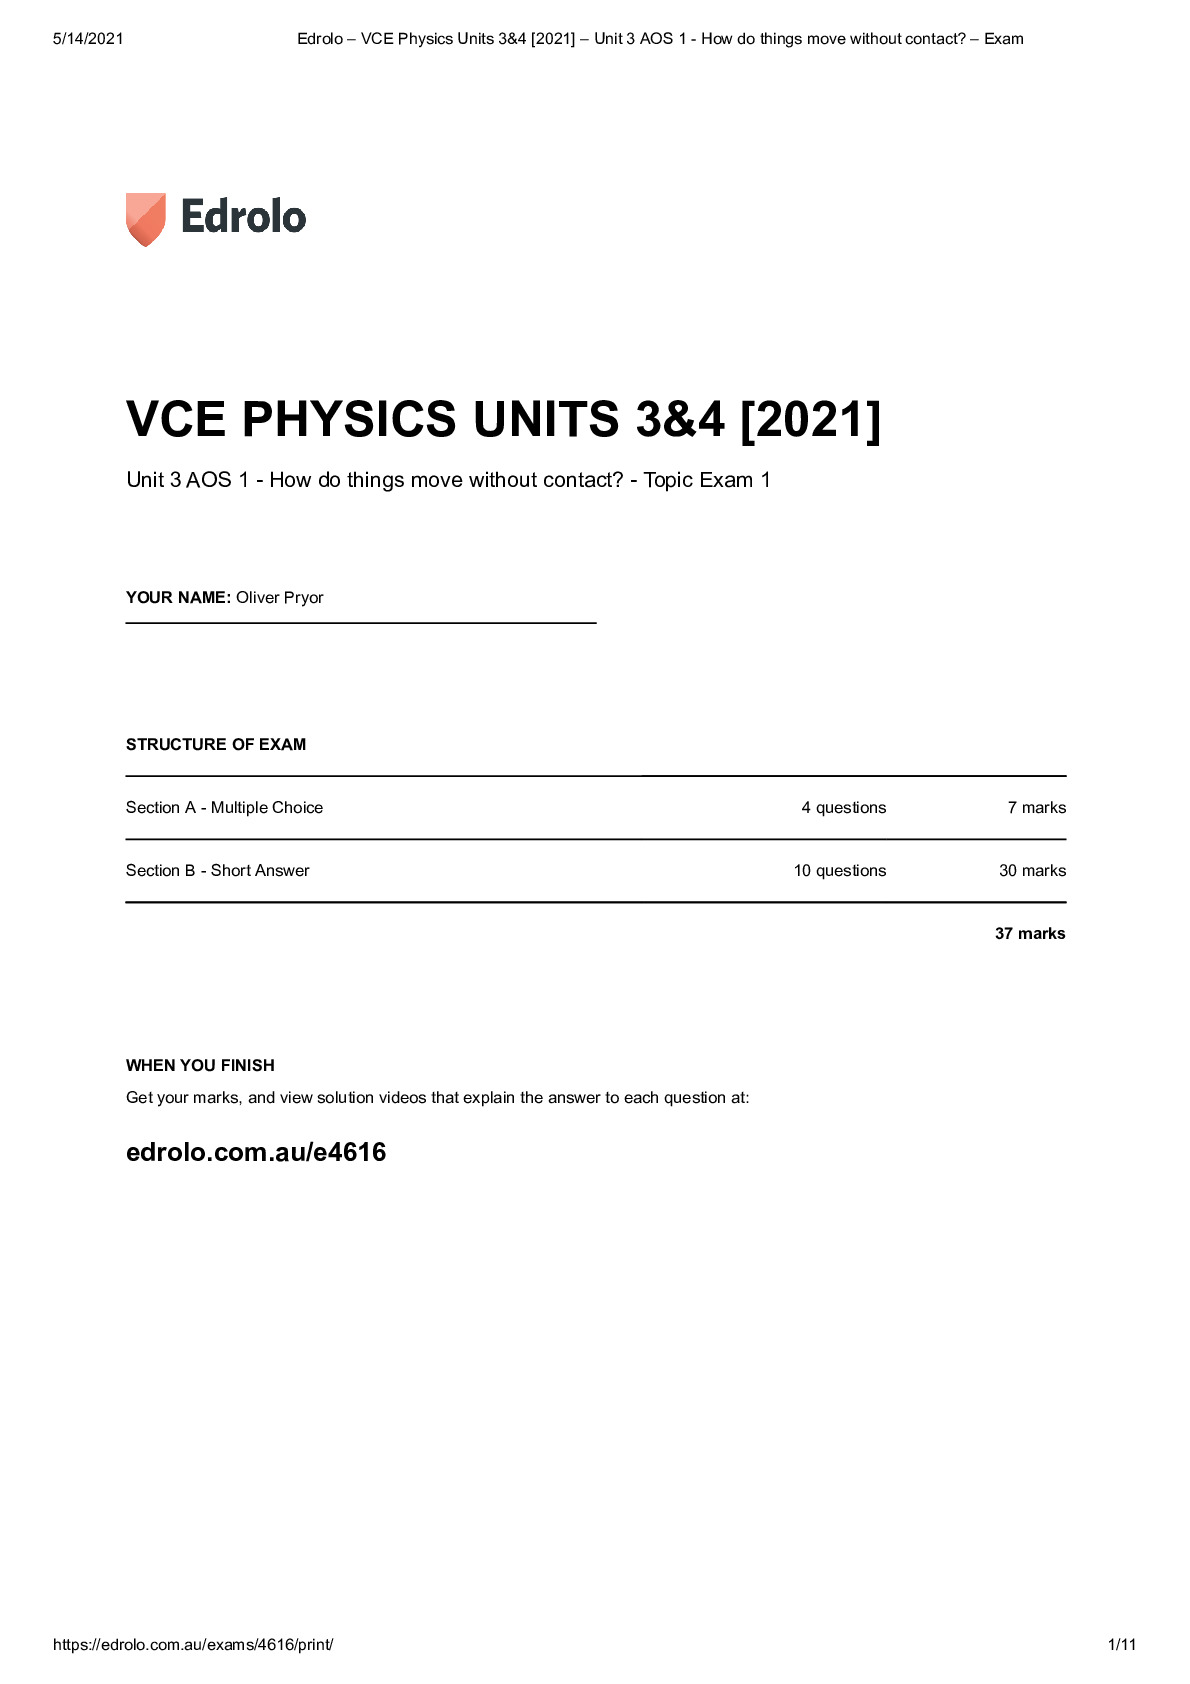 Edrolo_____VCE_Physics_Units_3_4__2021______Unit_3_AOS_1___How_do_things_move_without_contact______Exam.pd